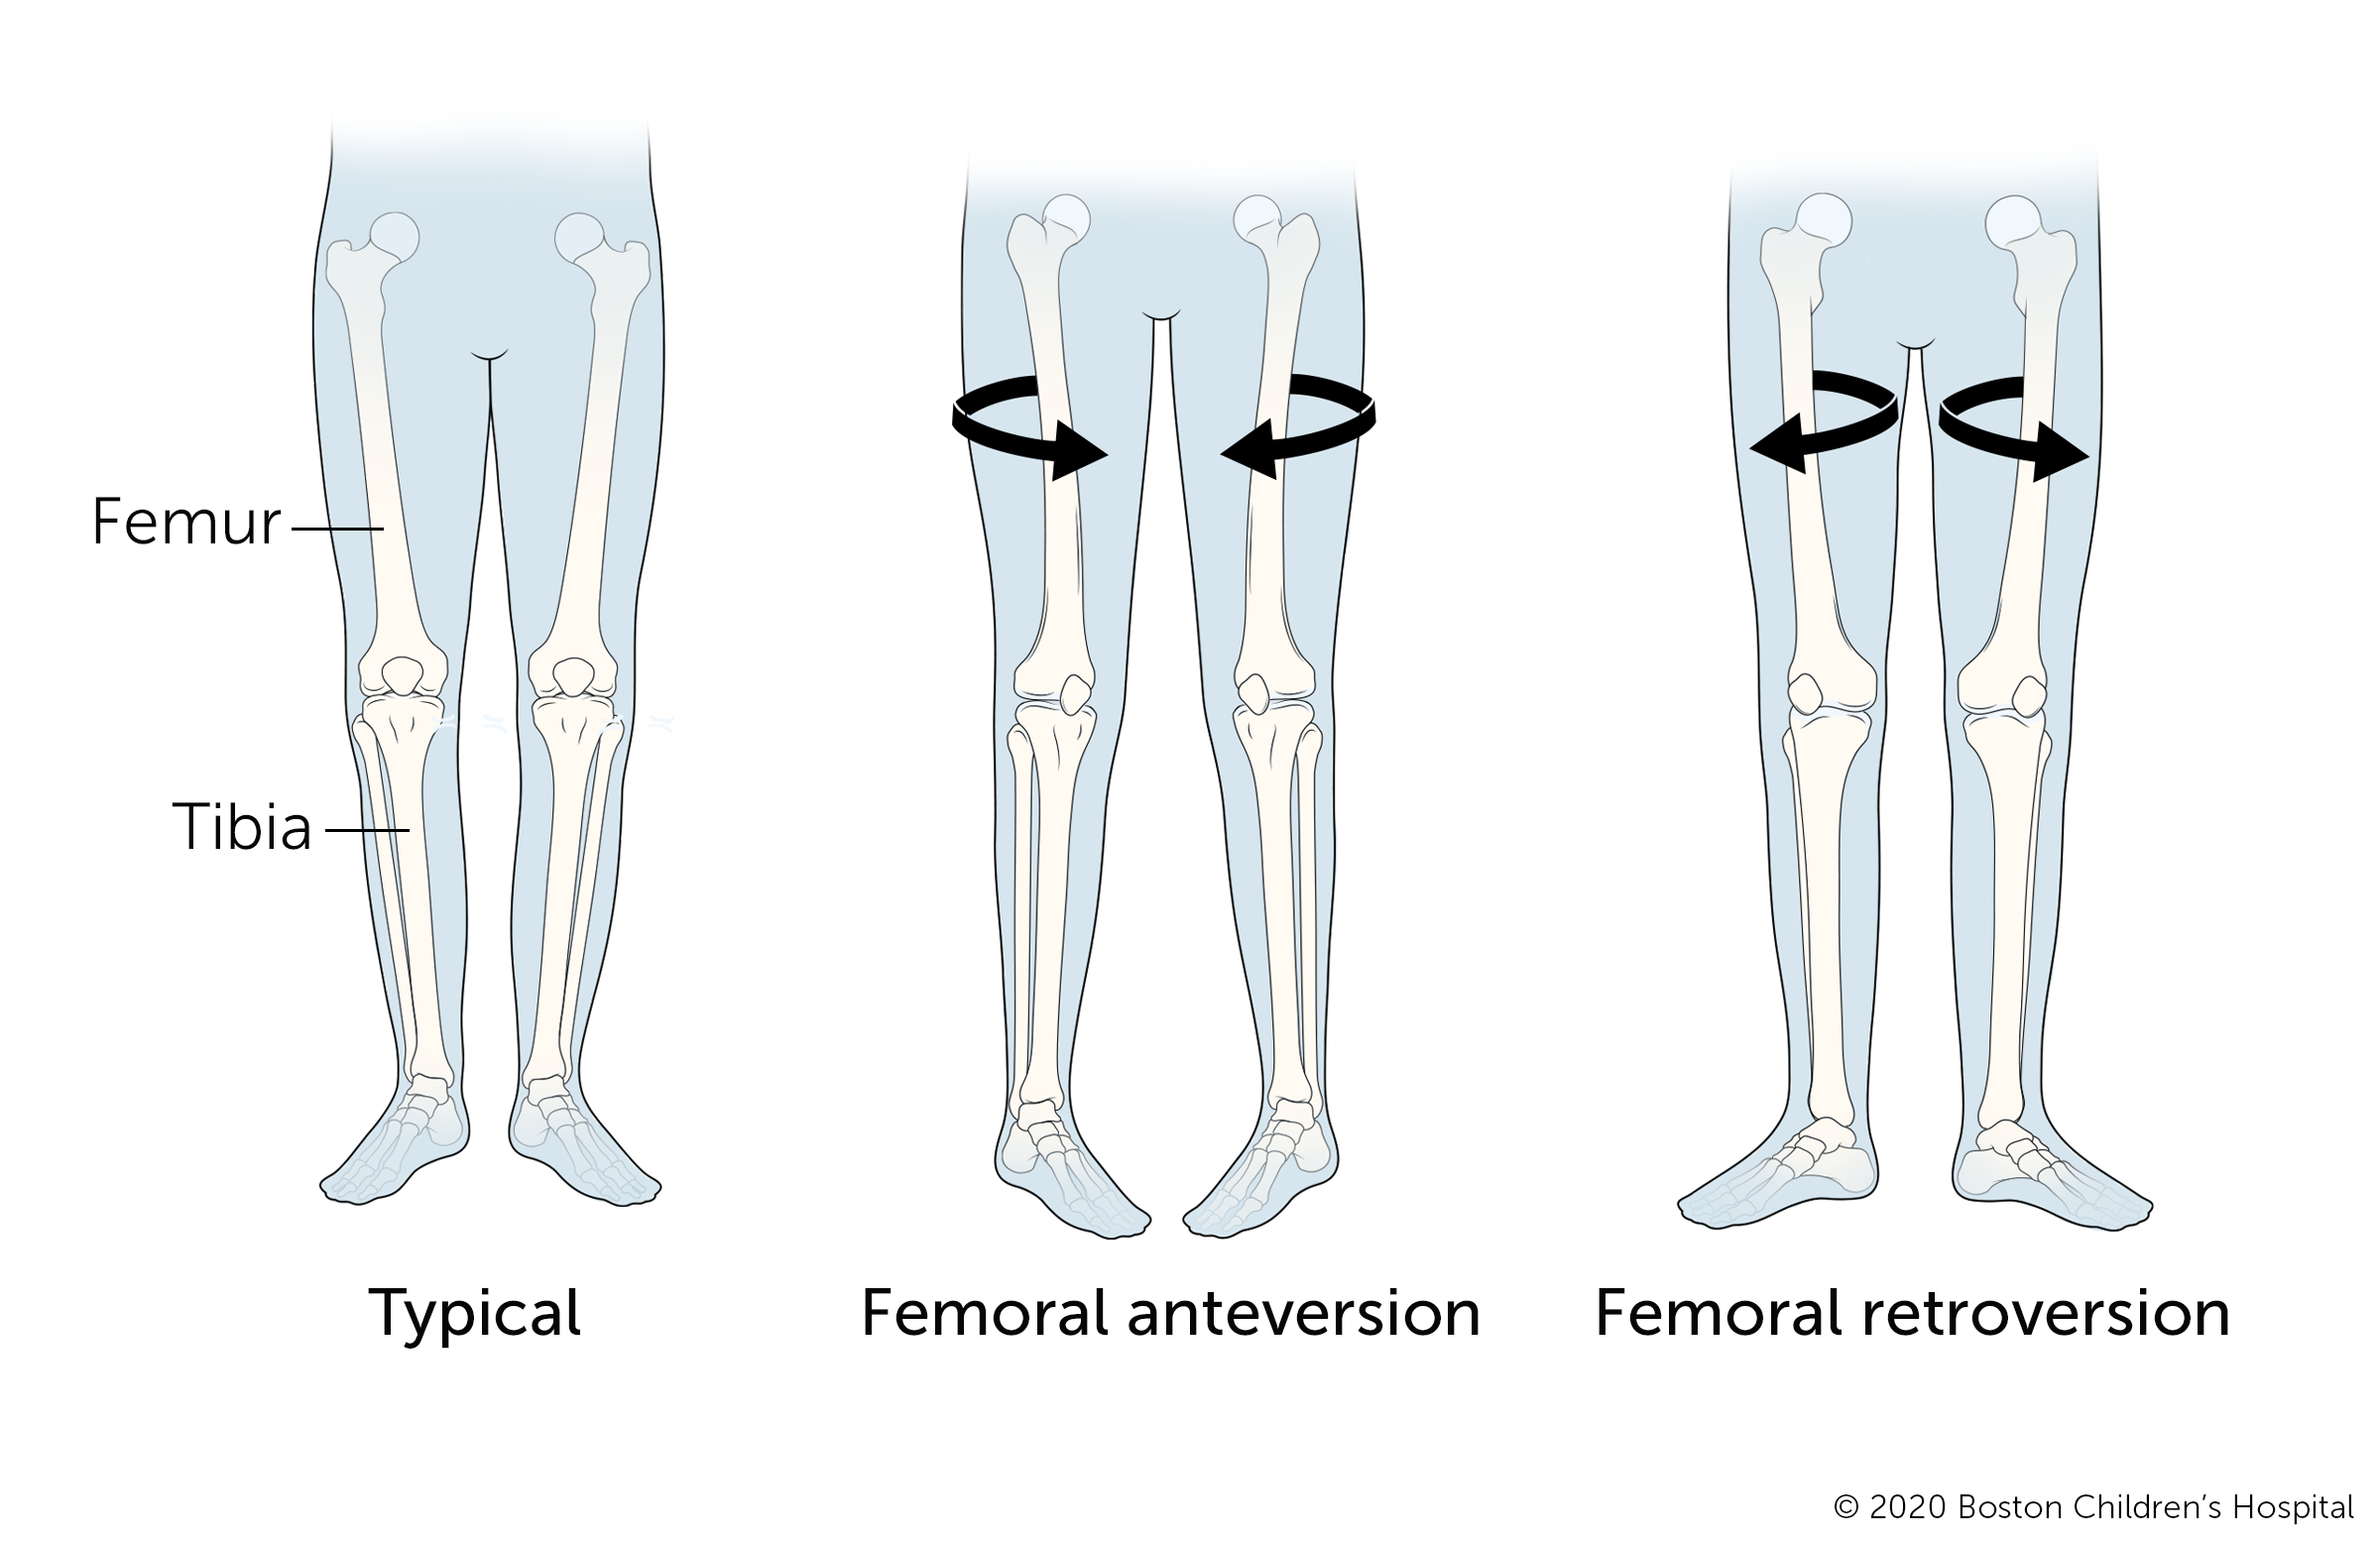 An illustration of typical legs, legs with femoral anteversion, and legs with femoral retroversion.